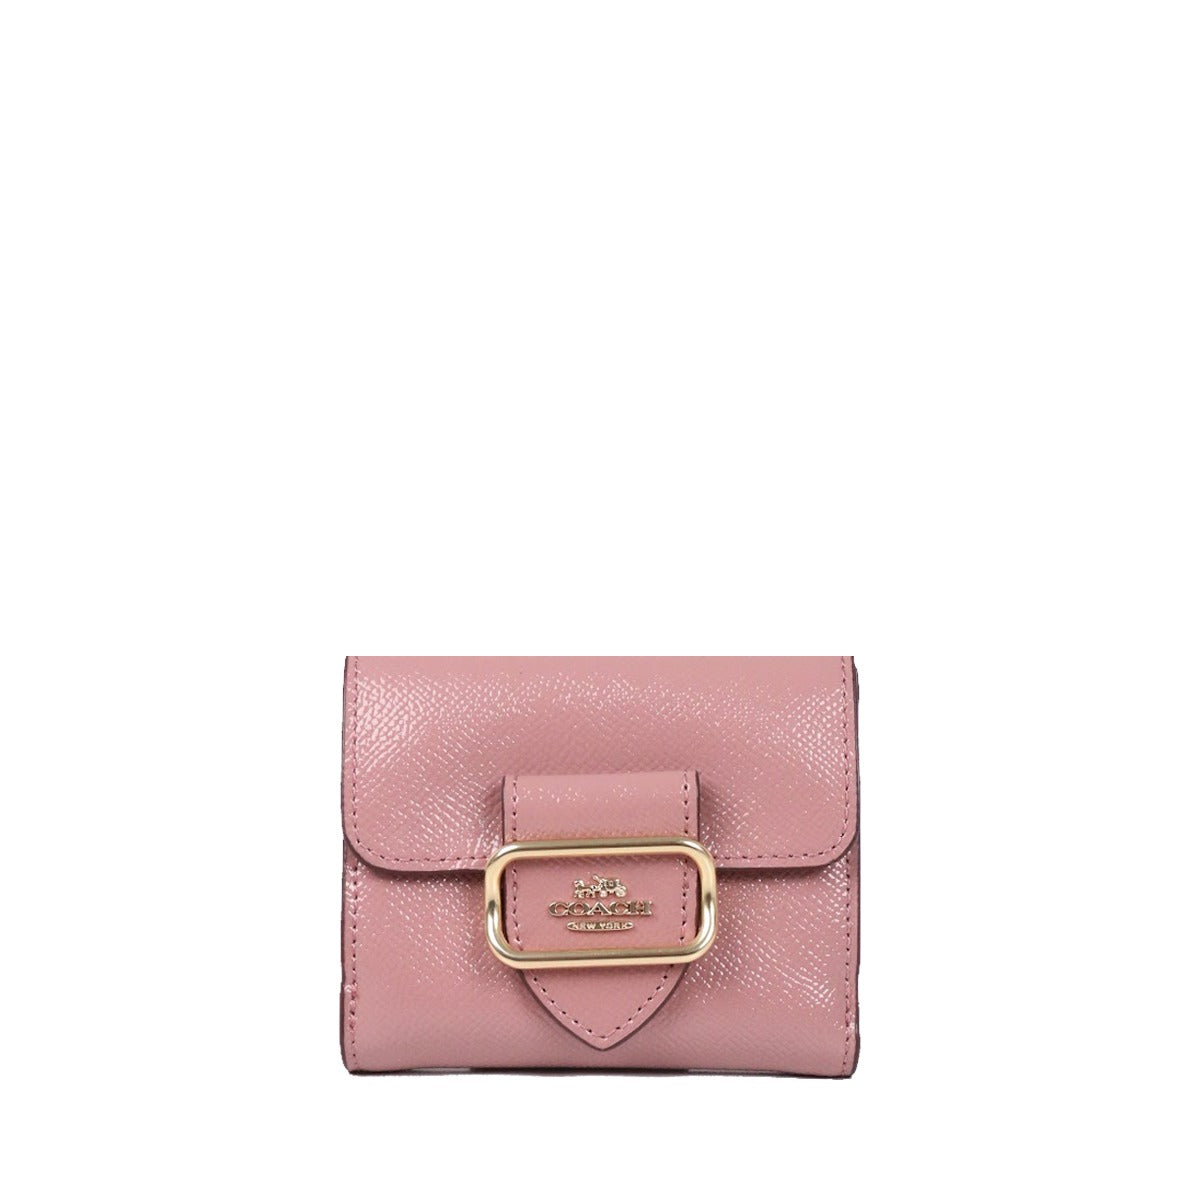 Coach Morgan CE671 Small Leather Wallet In Dusty Rose